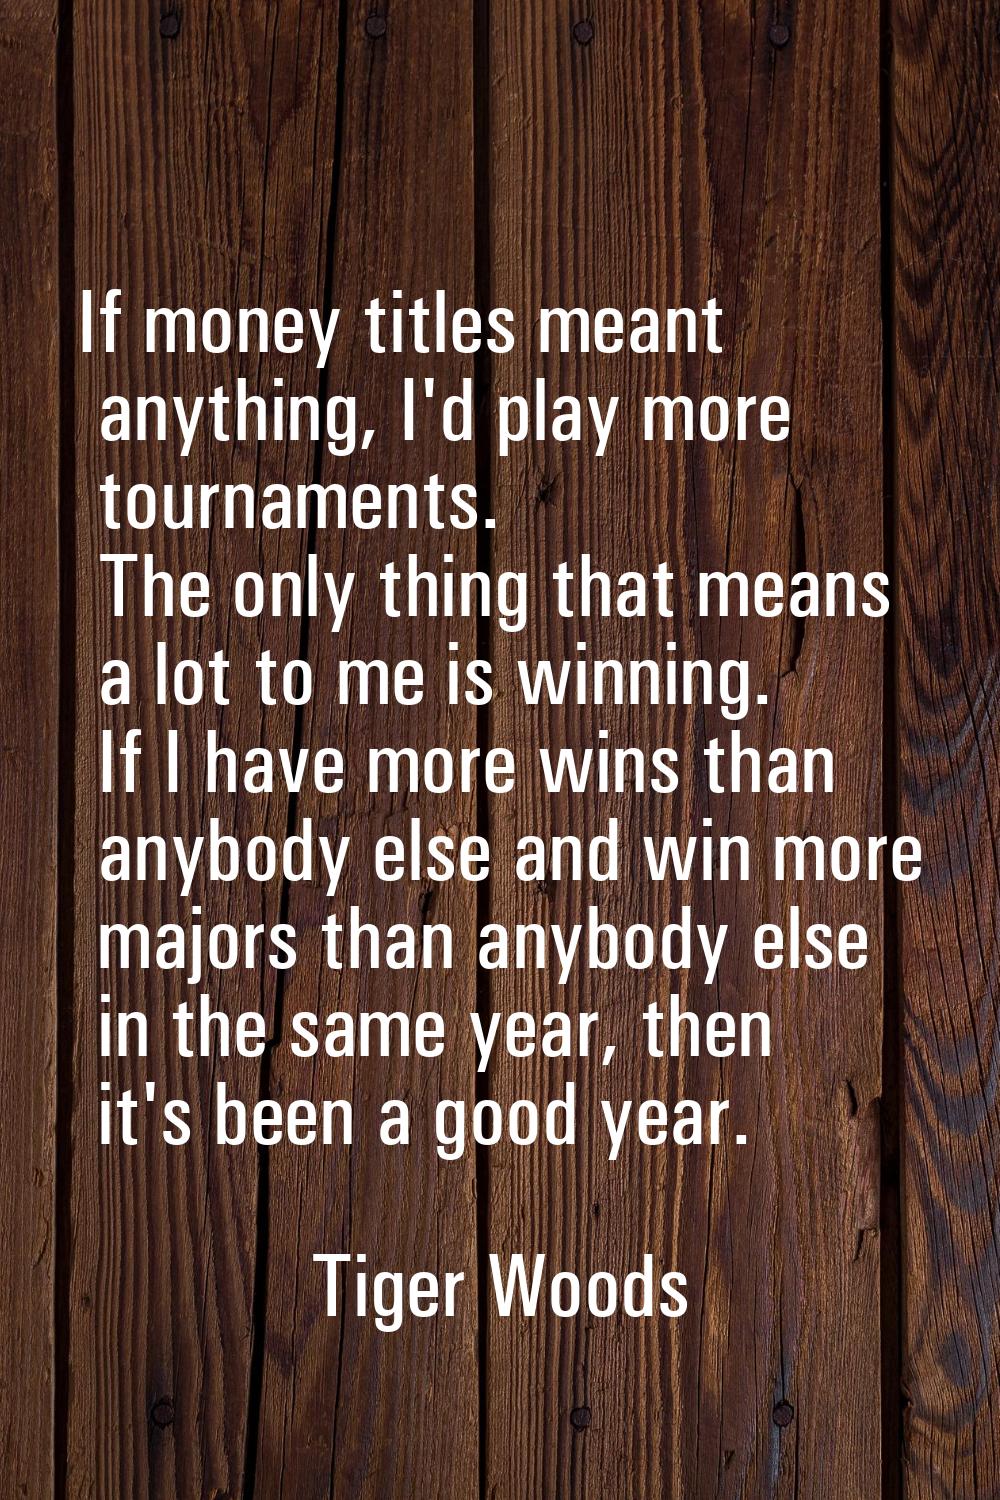 If money titles meant anything, I'd play more tournaments. The only thing that means a lot to me is